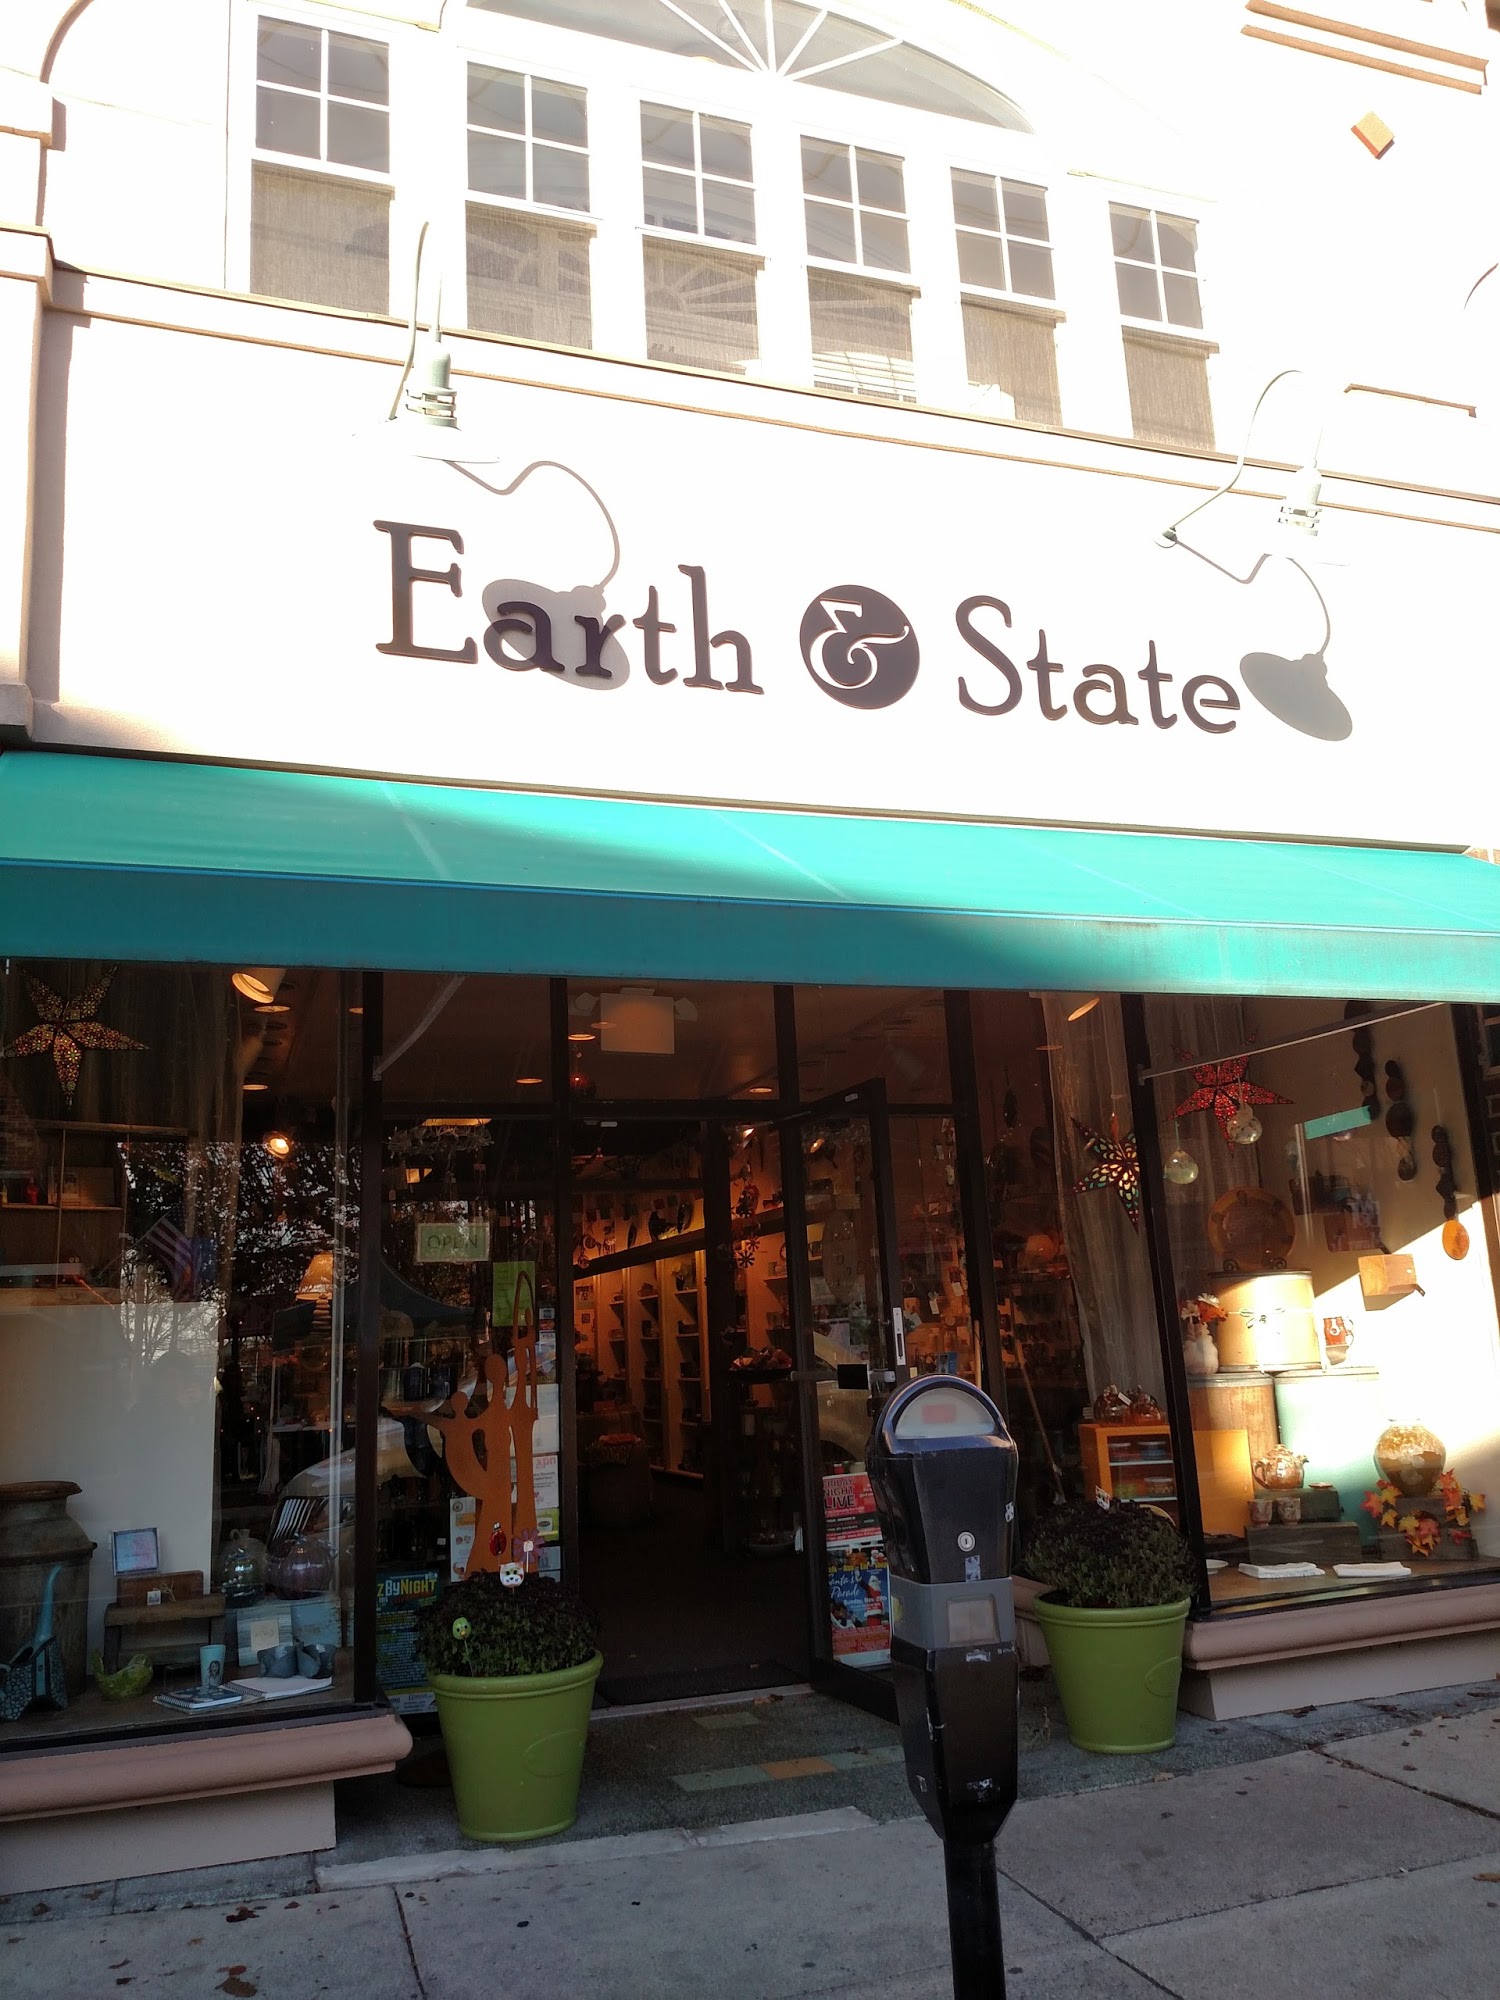 Earth & State